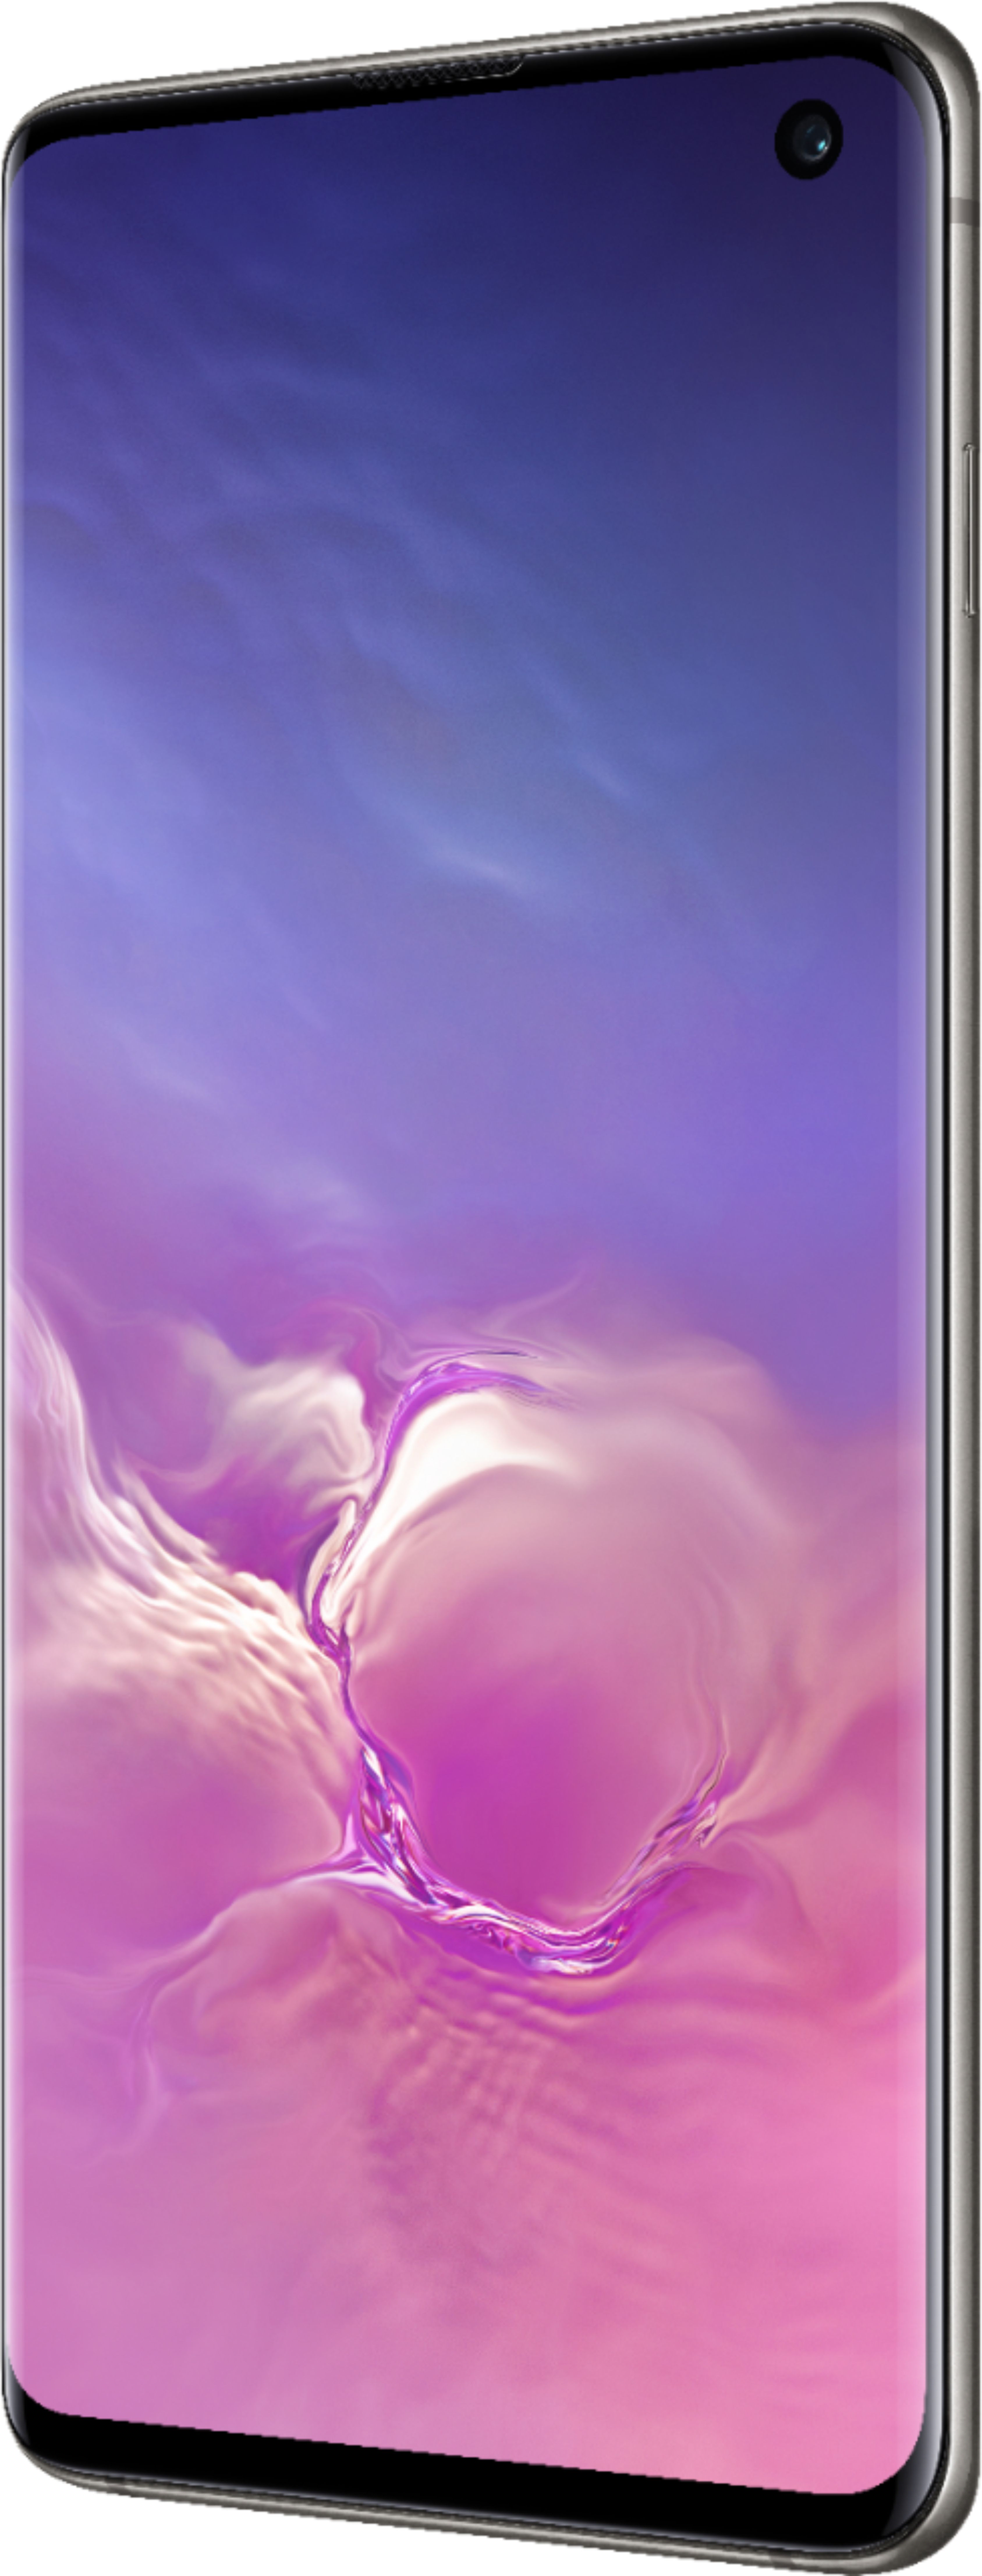 Best Buy: Samsung Galaxy S10 with 128GB Memory Cell Phone Prism